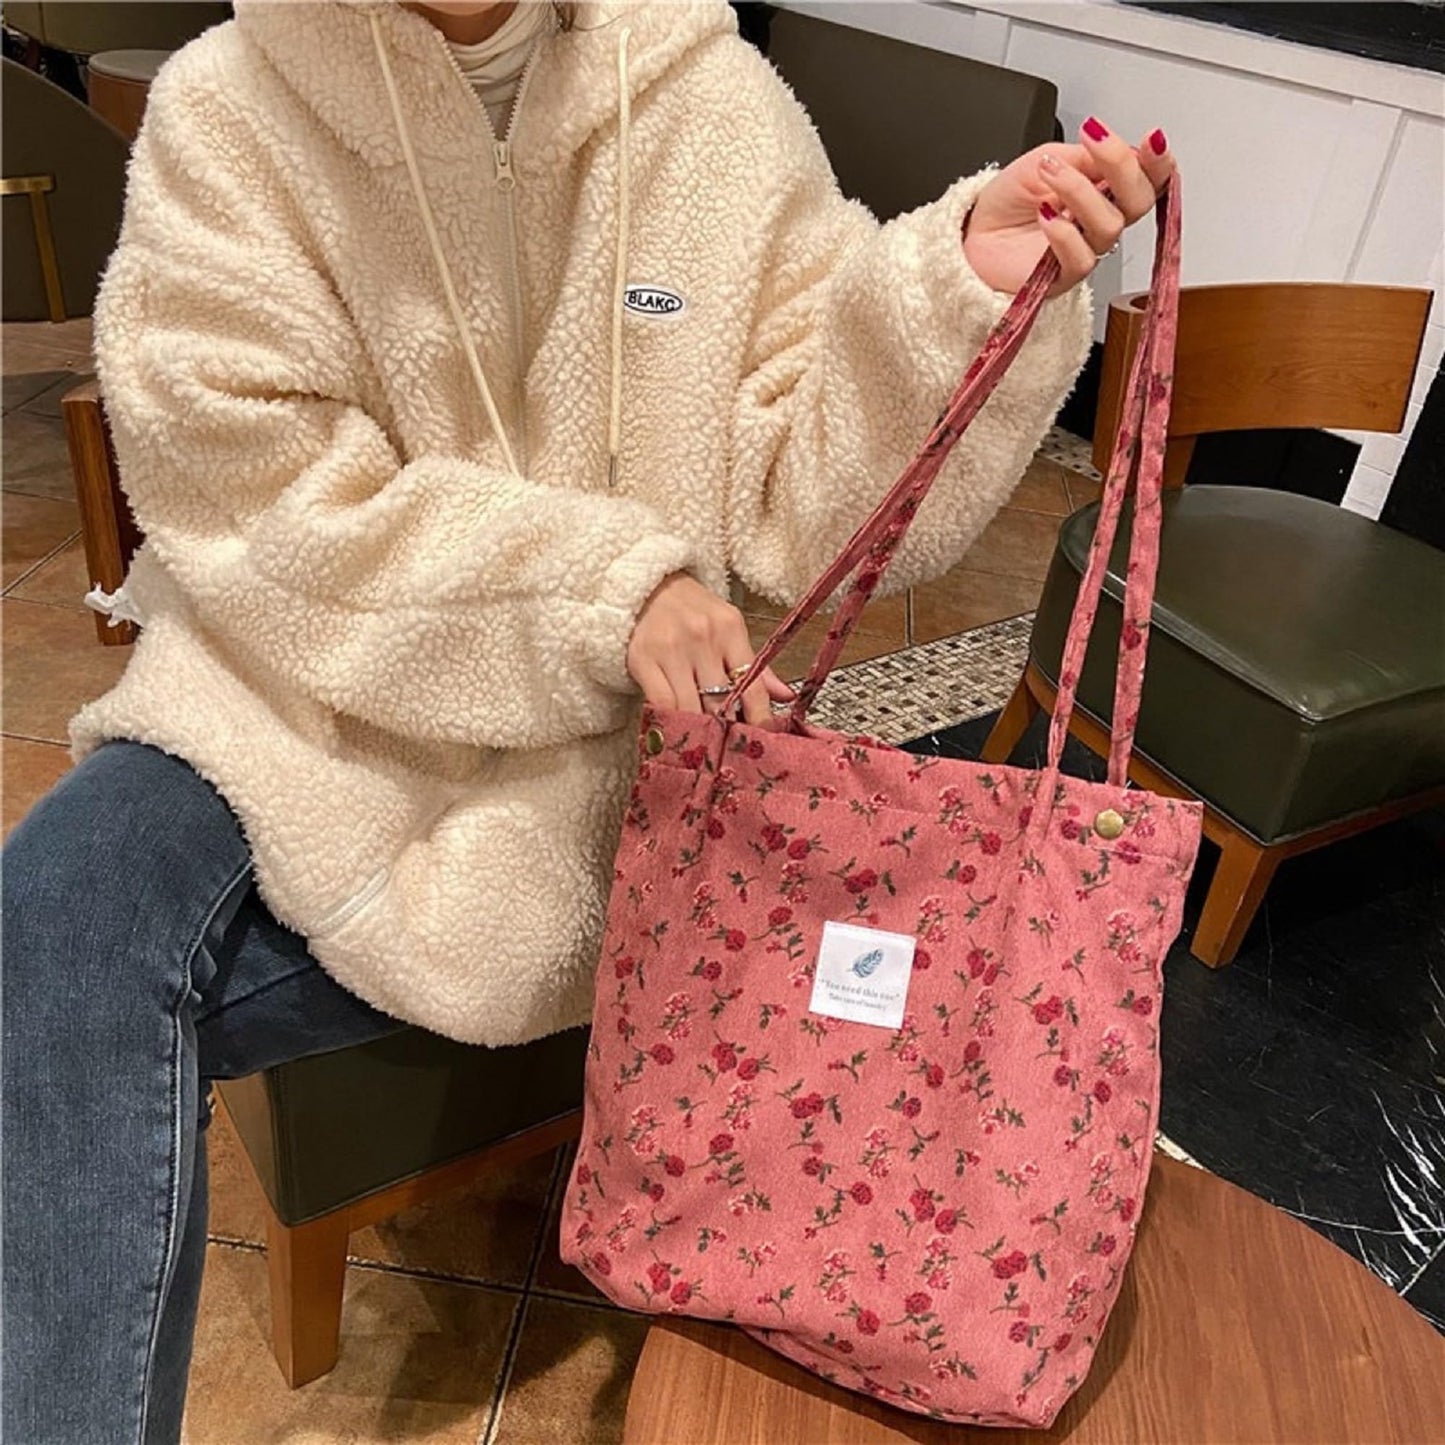 Kovewon 2 Pcs Corduroy Tote Bag for Women Rose Floral Makeup Bag Aesthetic Tote Bag with Canvas Inner Pocket Makeup Pouch for Girls, Red